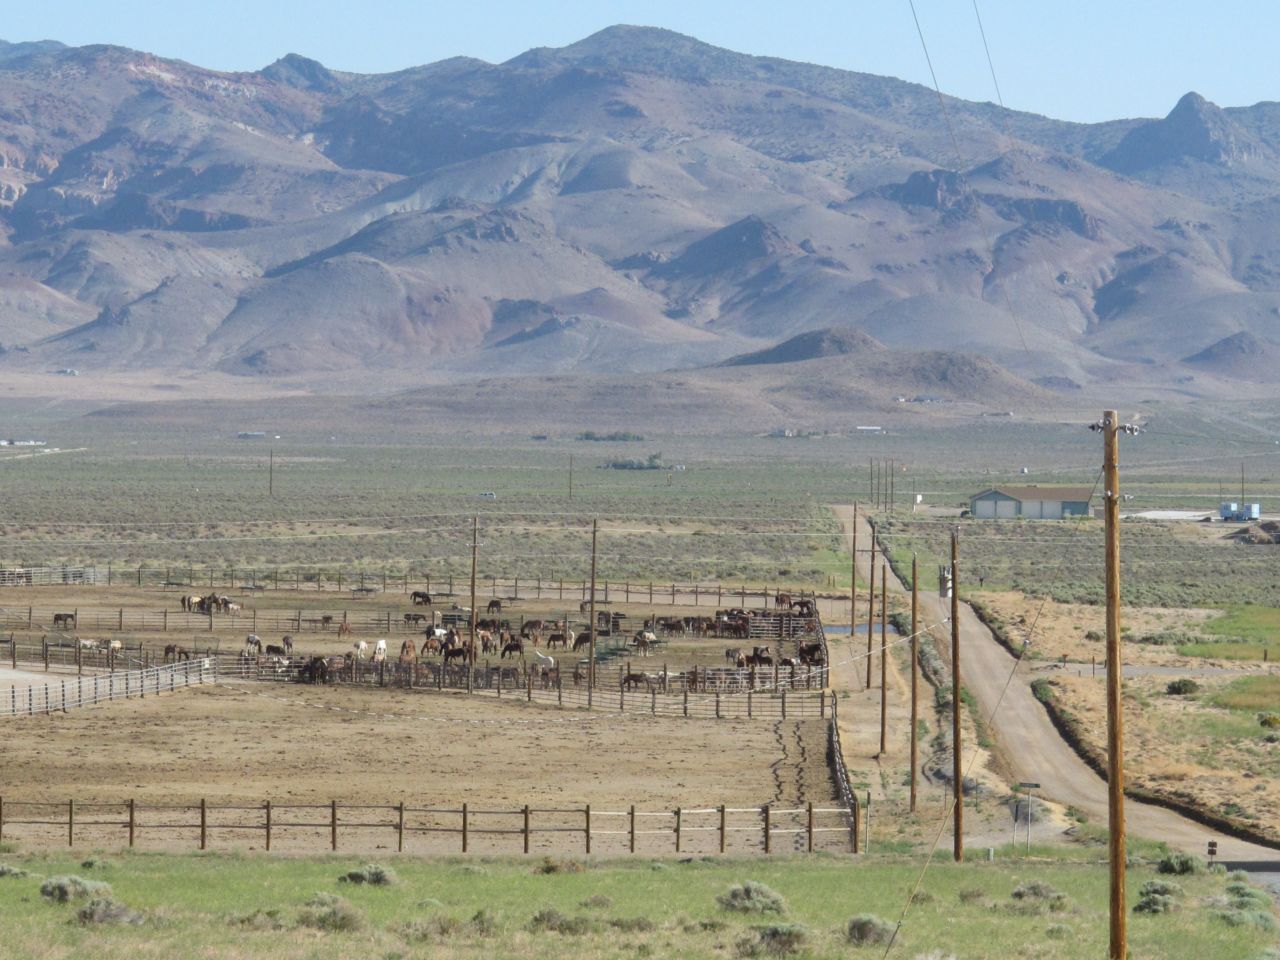 Horses stand behind a fence at the U.S. Bureau of Land Management's Palomino Valley holding facility in Reno, Nevada, on June 5, 2013. More than 80% of the land in Nevada is federally owned.